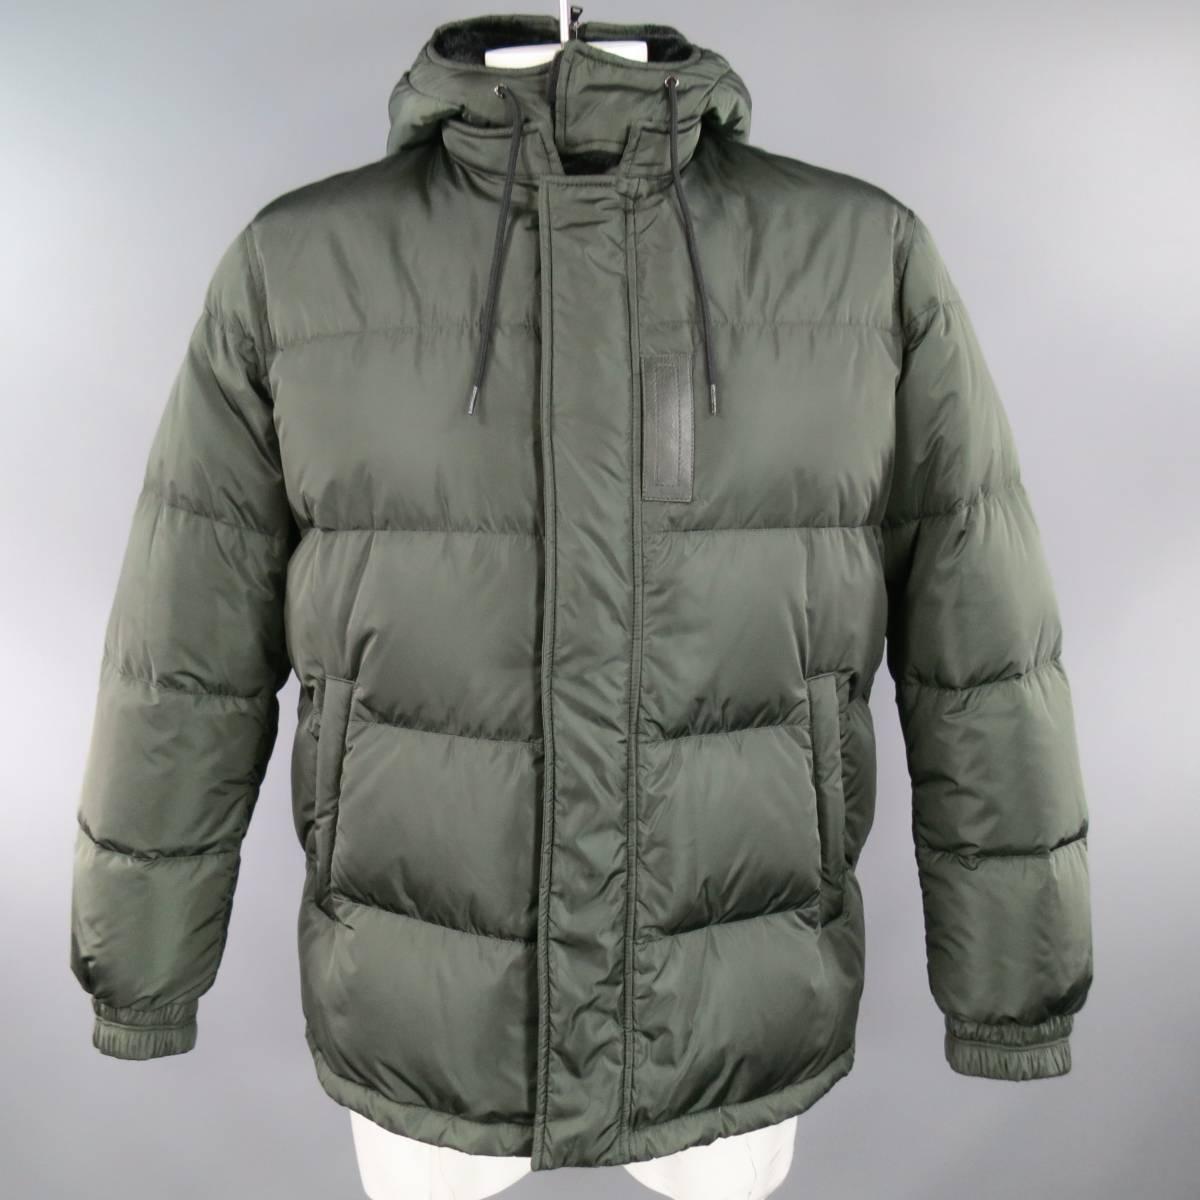 PRADA Jacket consists of poliammide material in a olive color tone. Designed with a zip-up front and snap closure, detachable hooded collar lined in a soft polyester. Zipper side pockets, black leather trim detail, quilted pattern throughout body